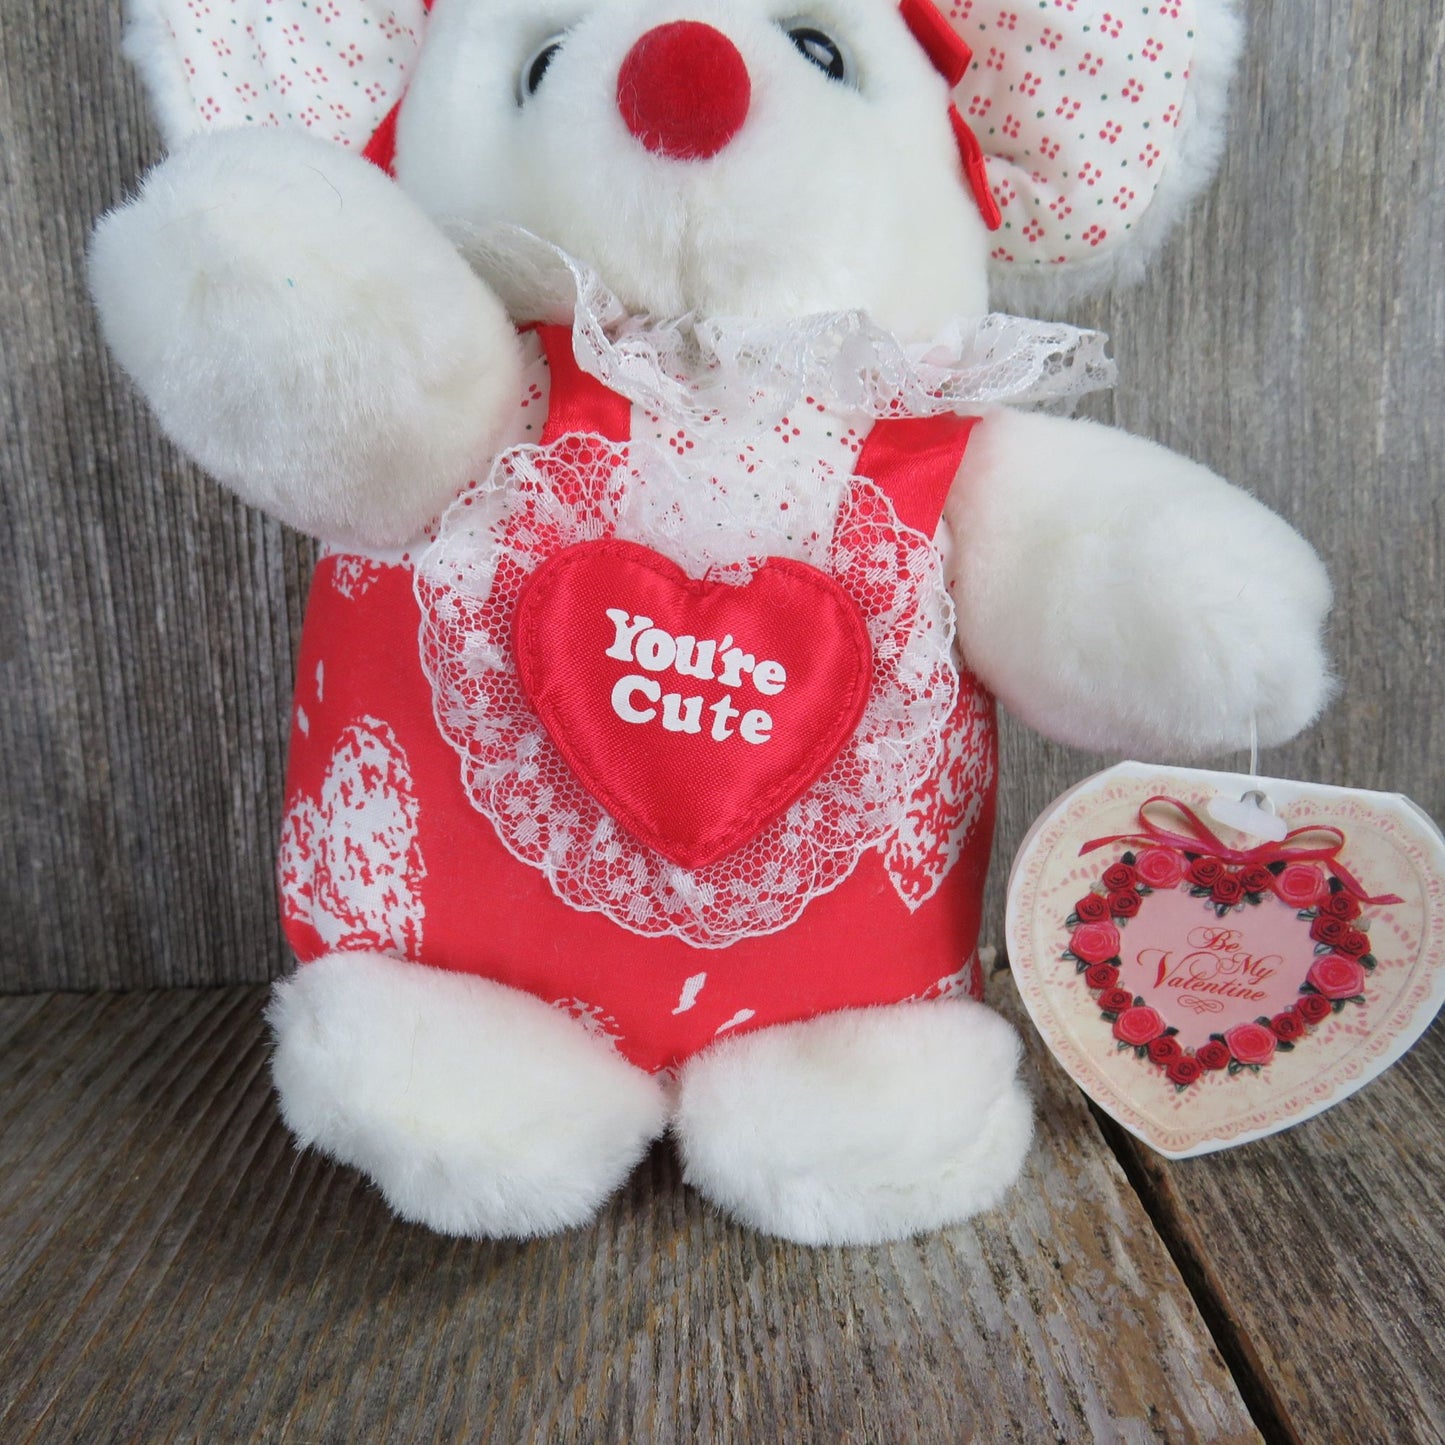 Vintage White Mouse Plush Valentine Dan Dee Red You're Cute Flocked Nose Fabric Body Cloth Easter Stuffed Animal